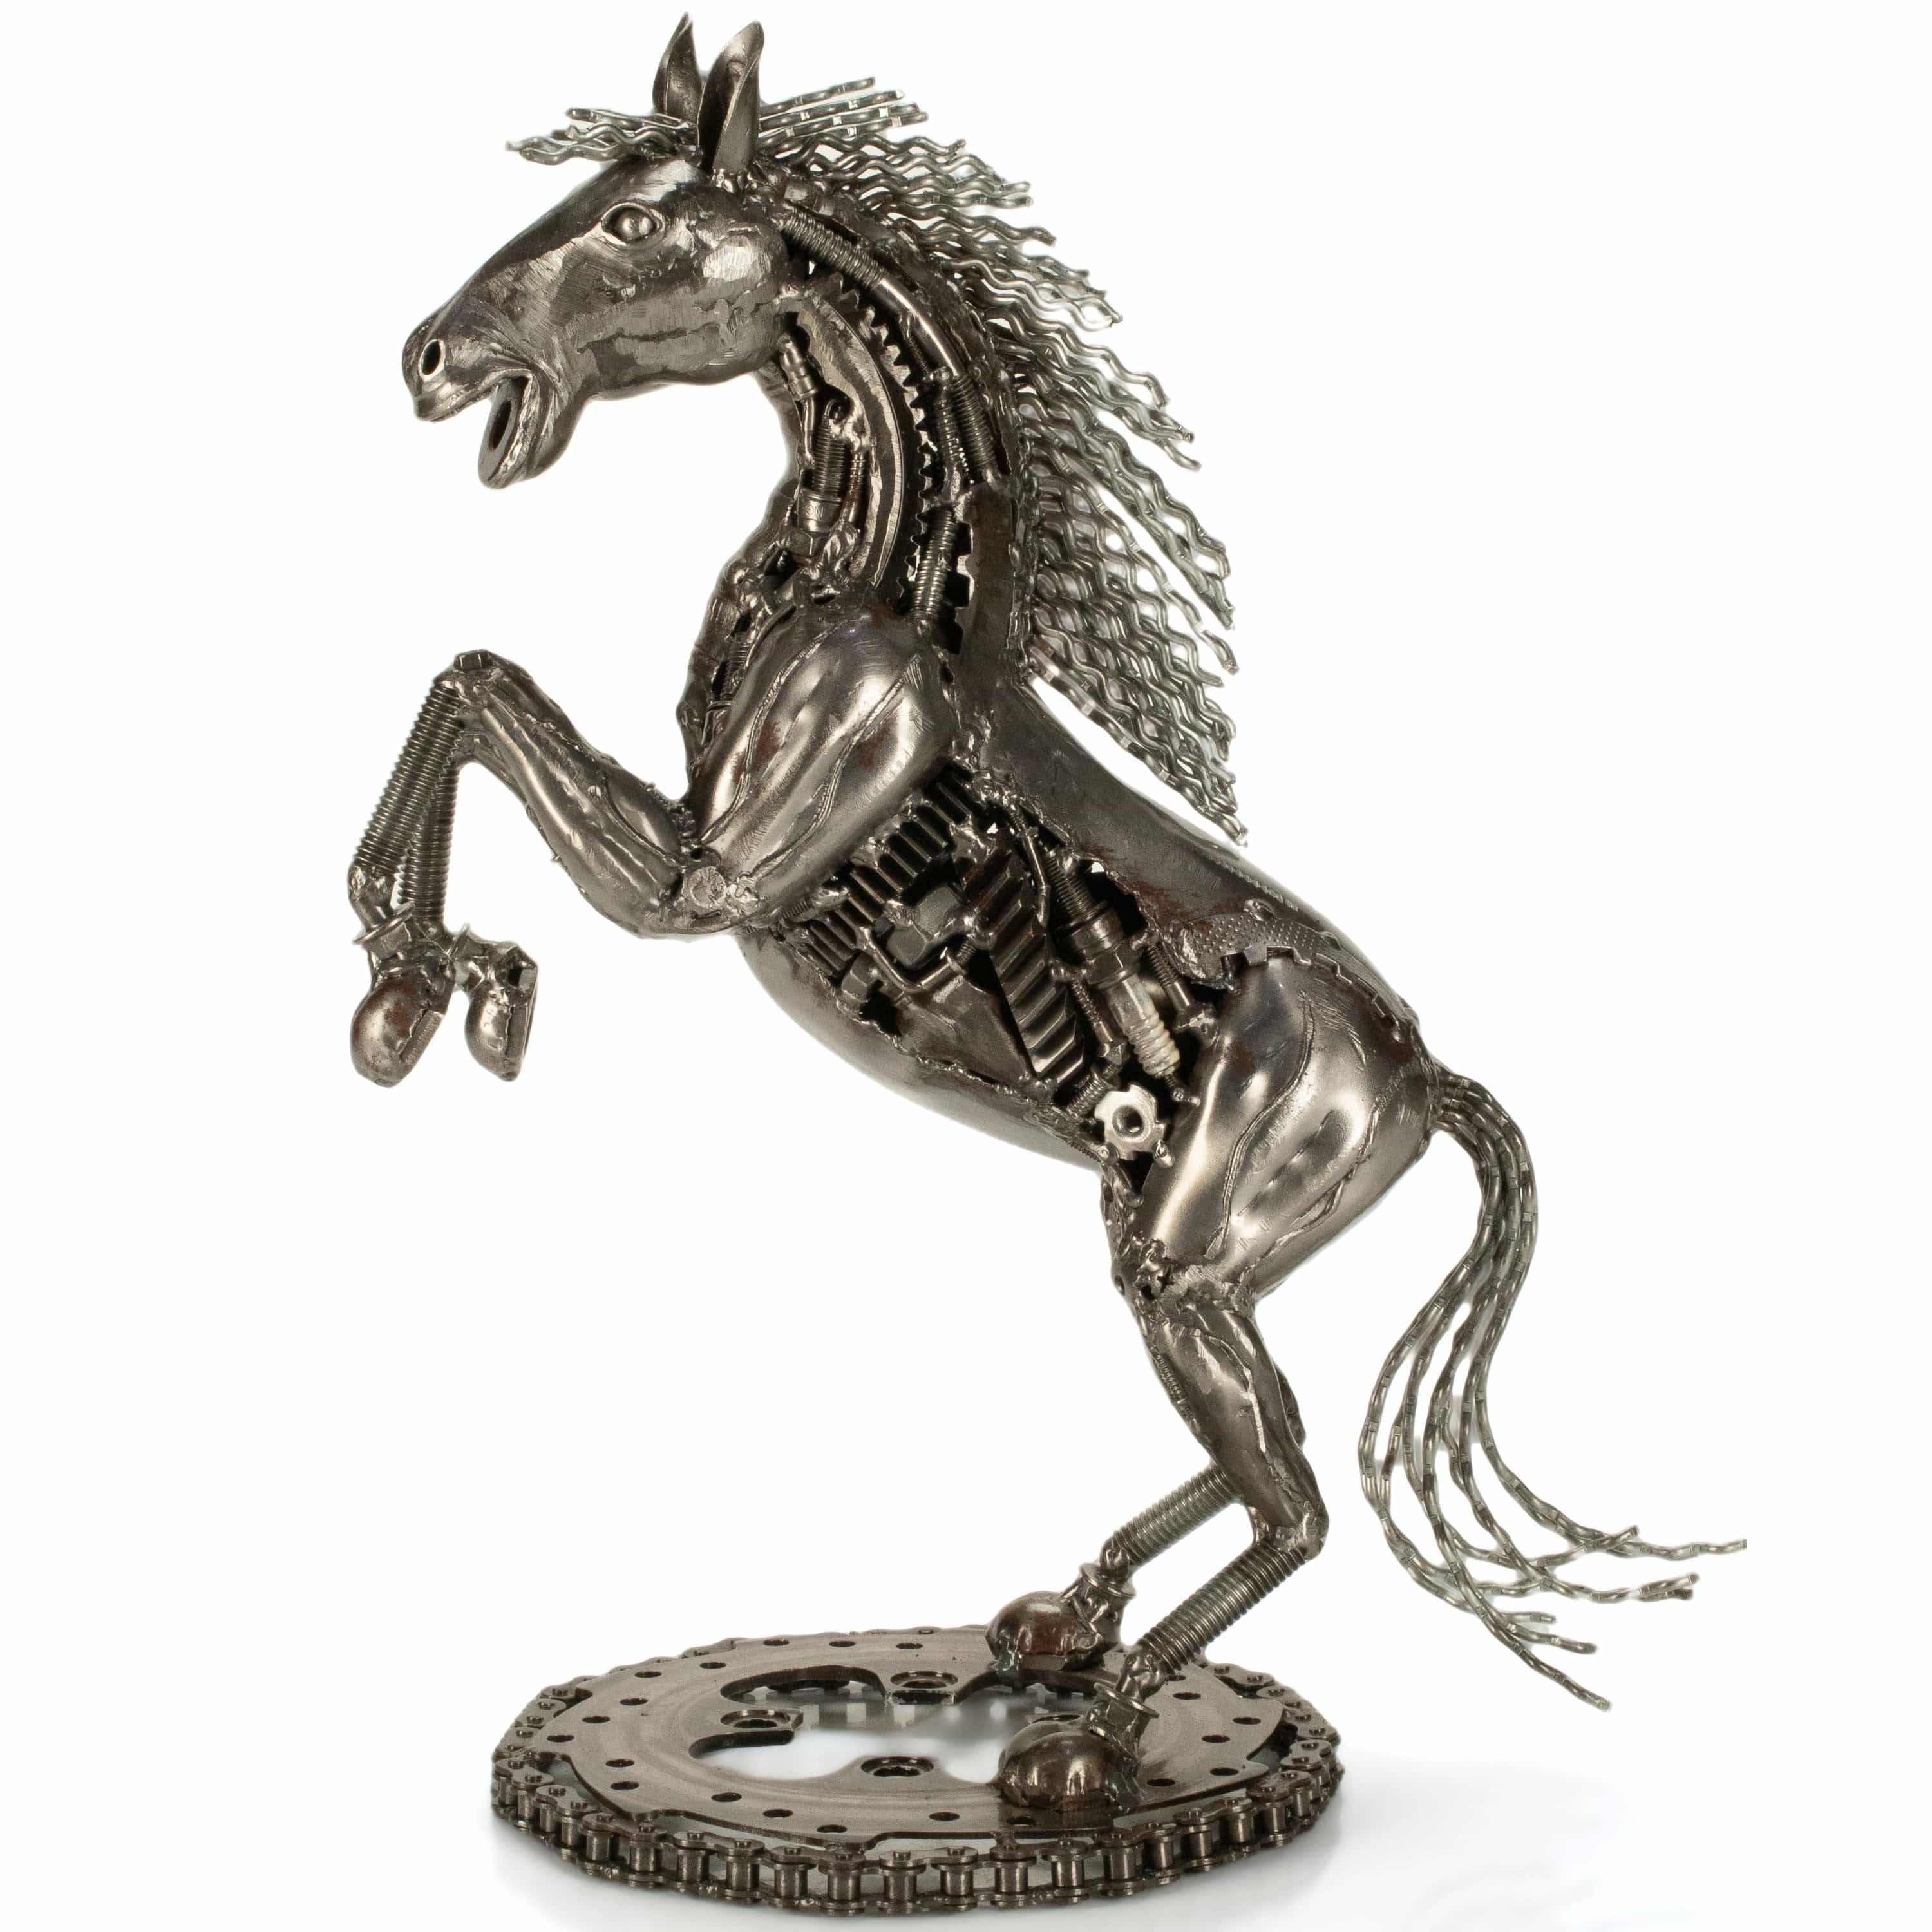 KALIFANO Recycled Metal Art Galloping Horse Inspired Recycled Metal Art Sculpture RMS-3000HS-PK